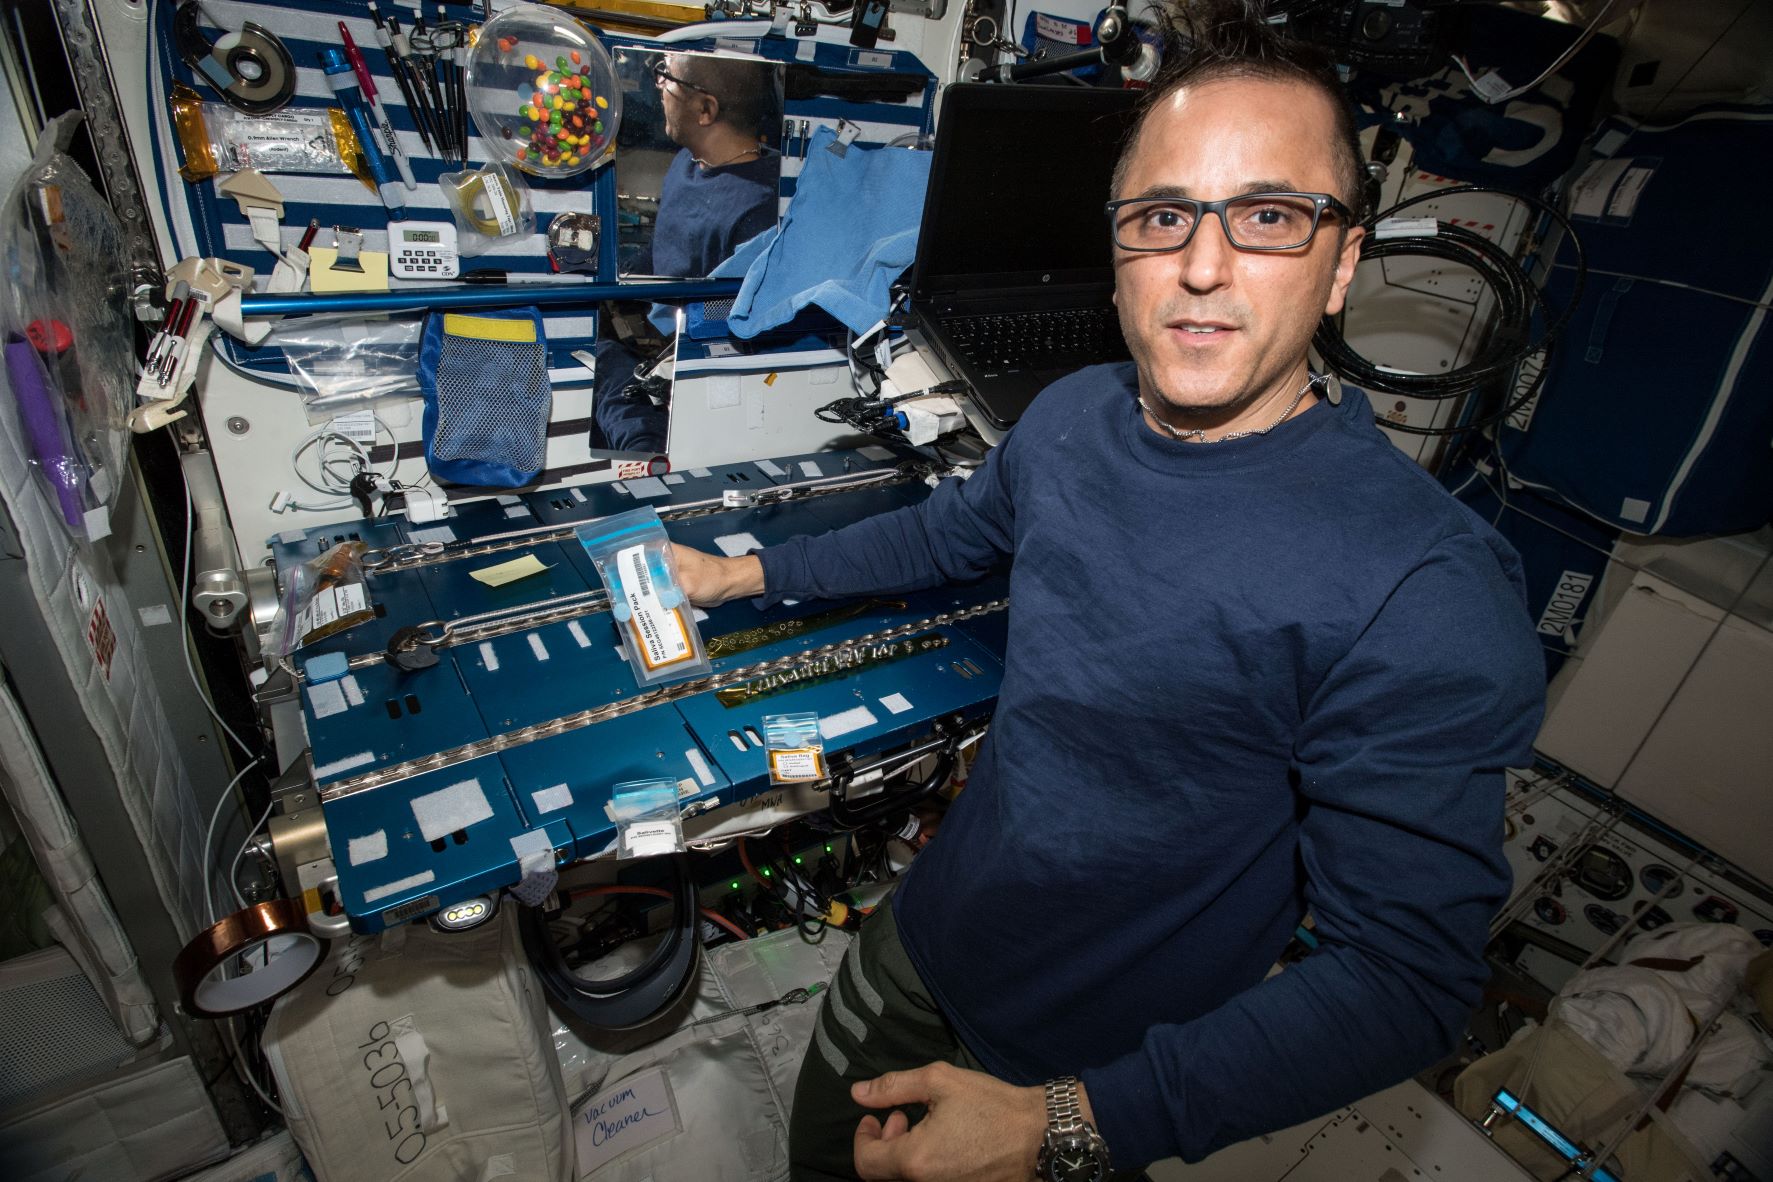 NASA astronaut Joe Acaba stores a vial of saliva on the space station. His and other saliva samples are sent back to Earth, where scientists analyze them to track changes in the immune system of crews during spaceflight.